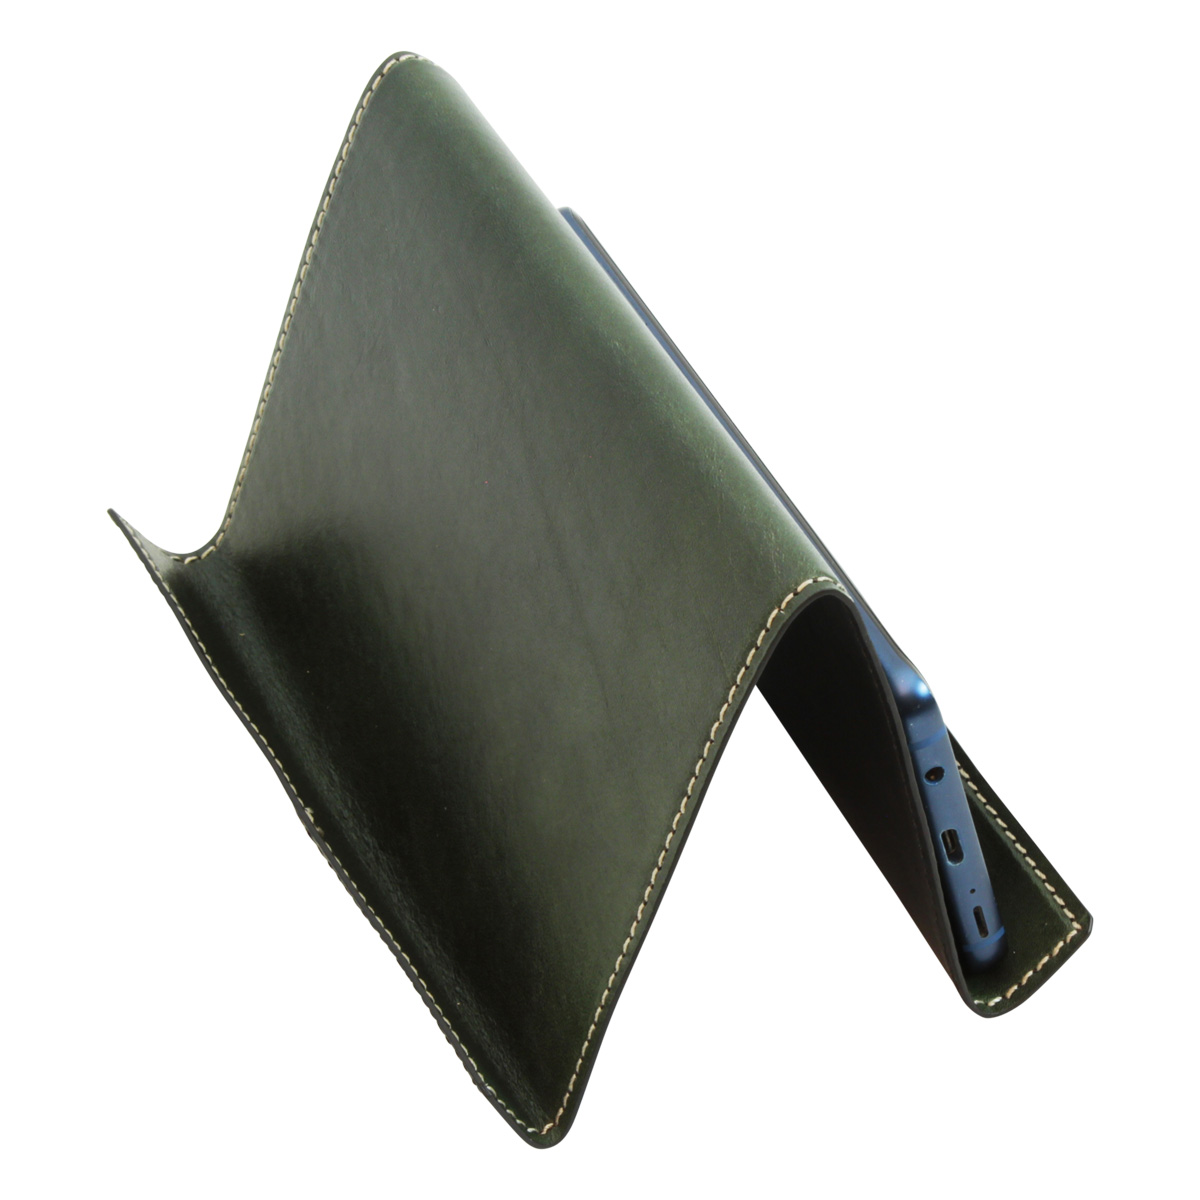 Leather ipad and iphone stand - green|764089VE|Old Angler Firenze